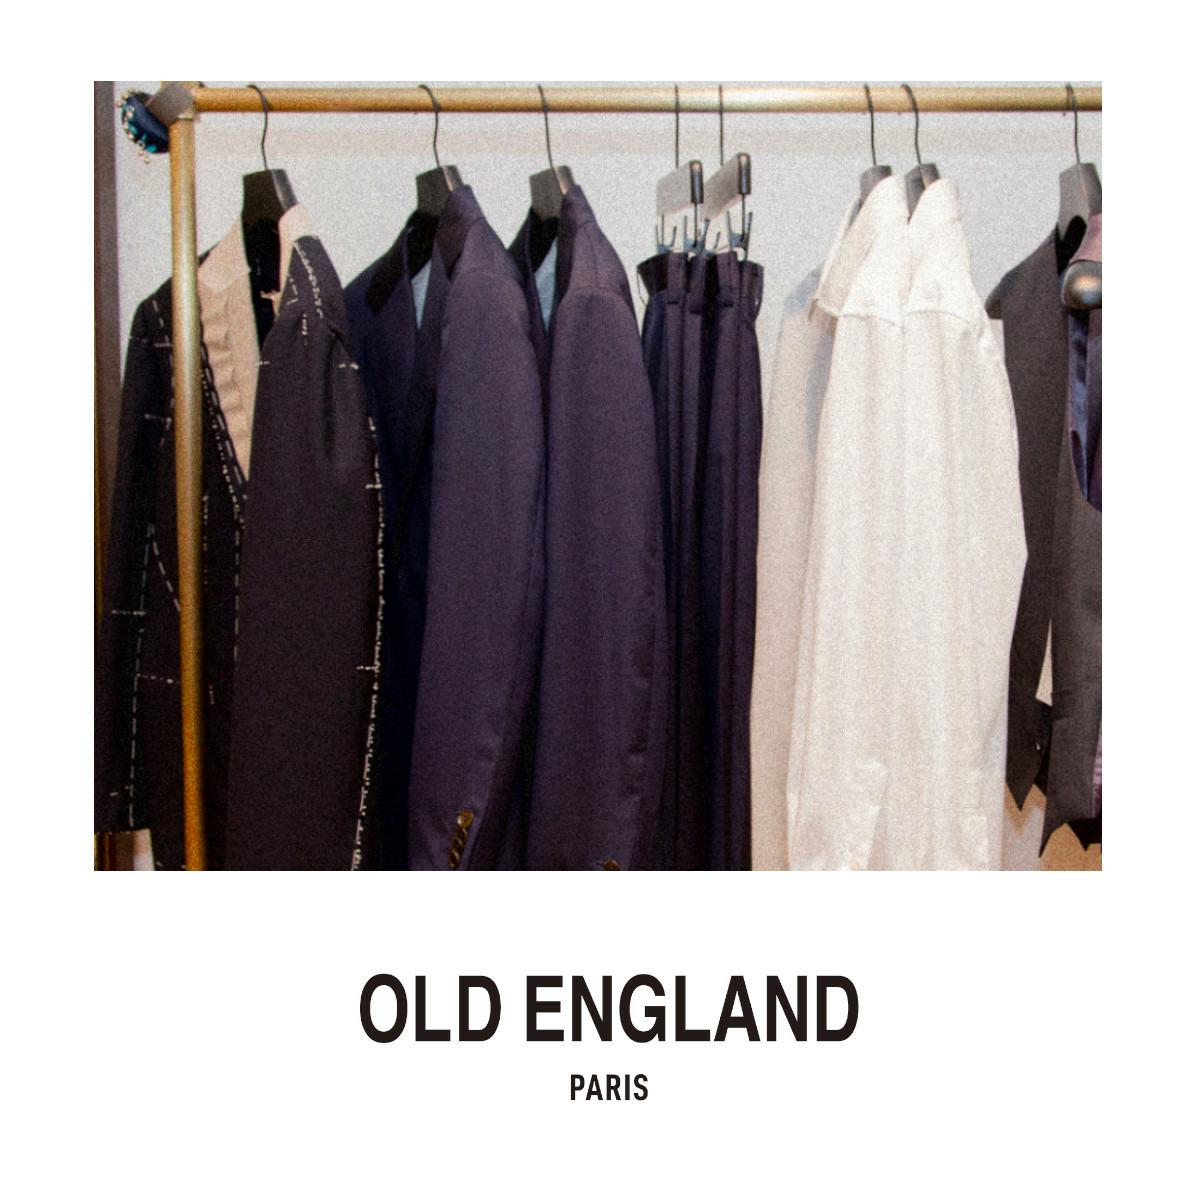 SUIT YOURSELF @ OLD ENGLAND